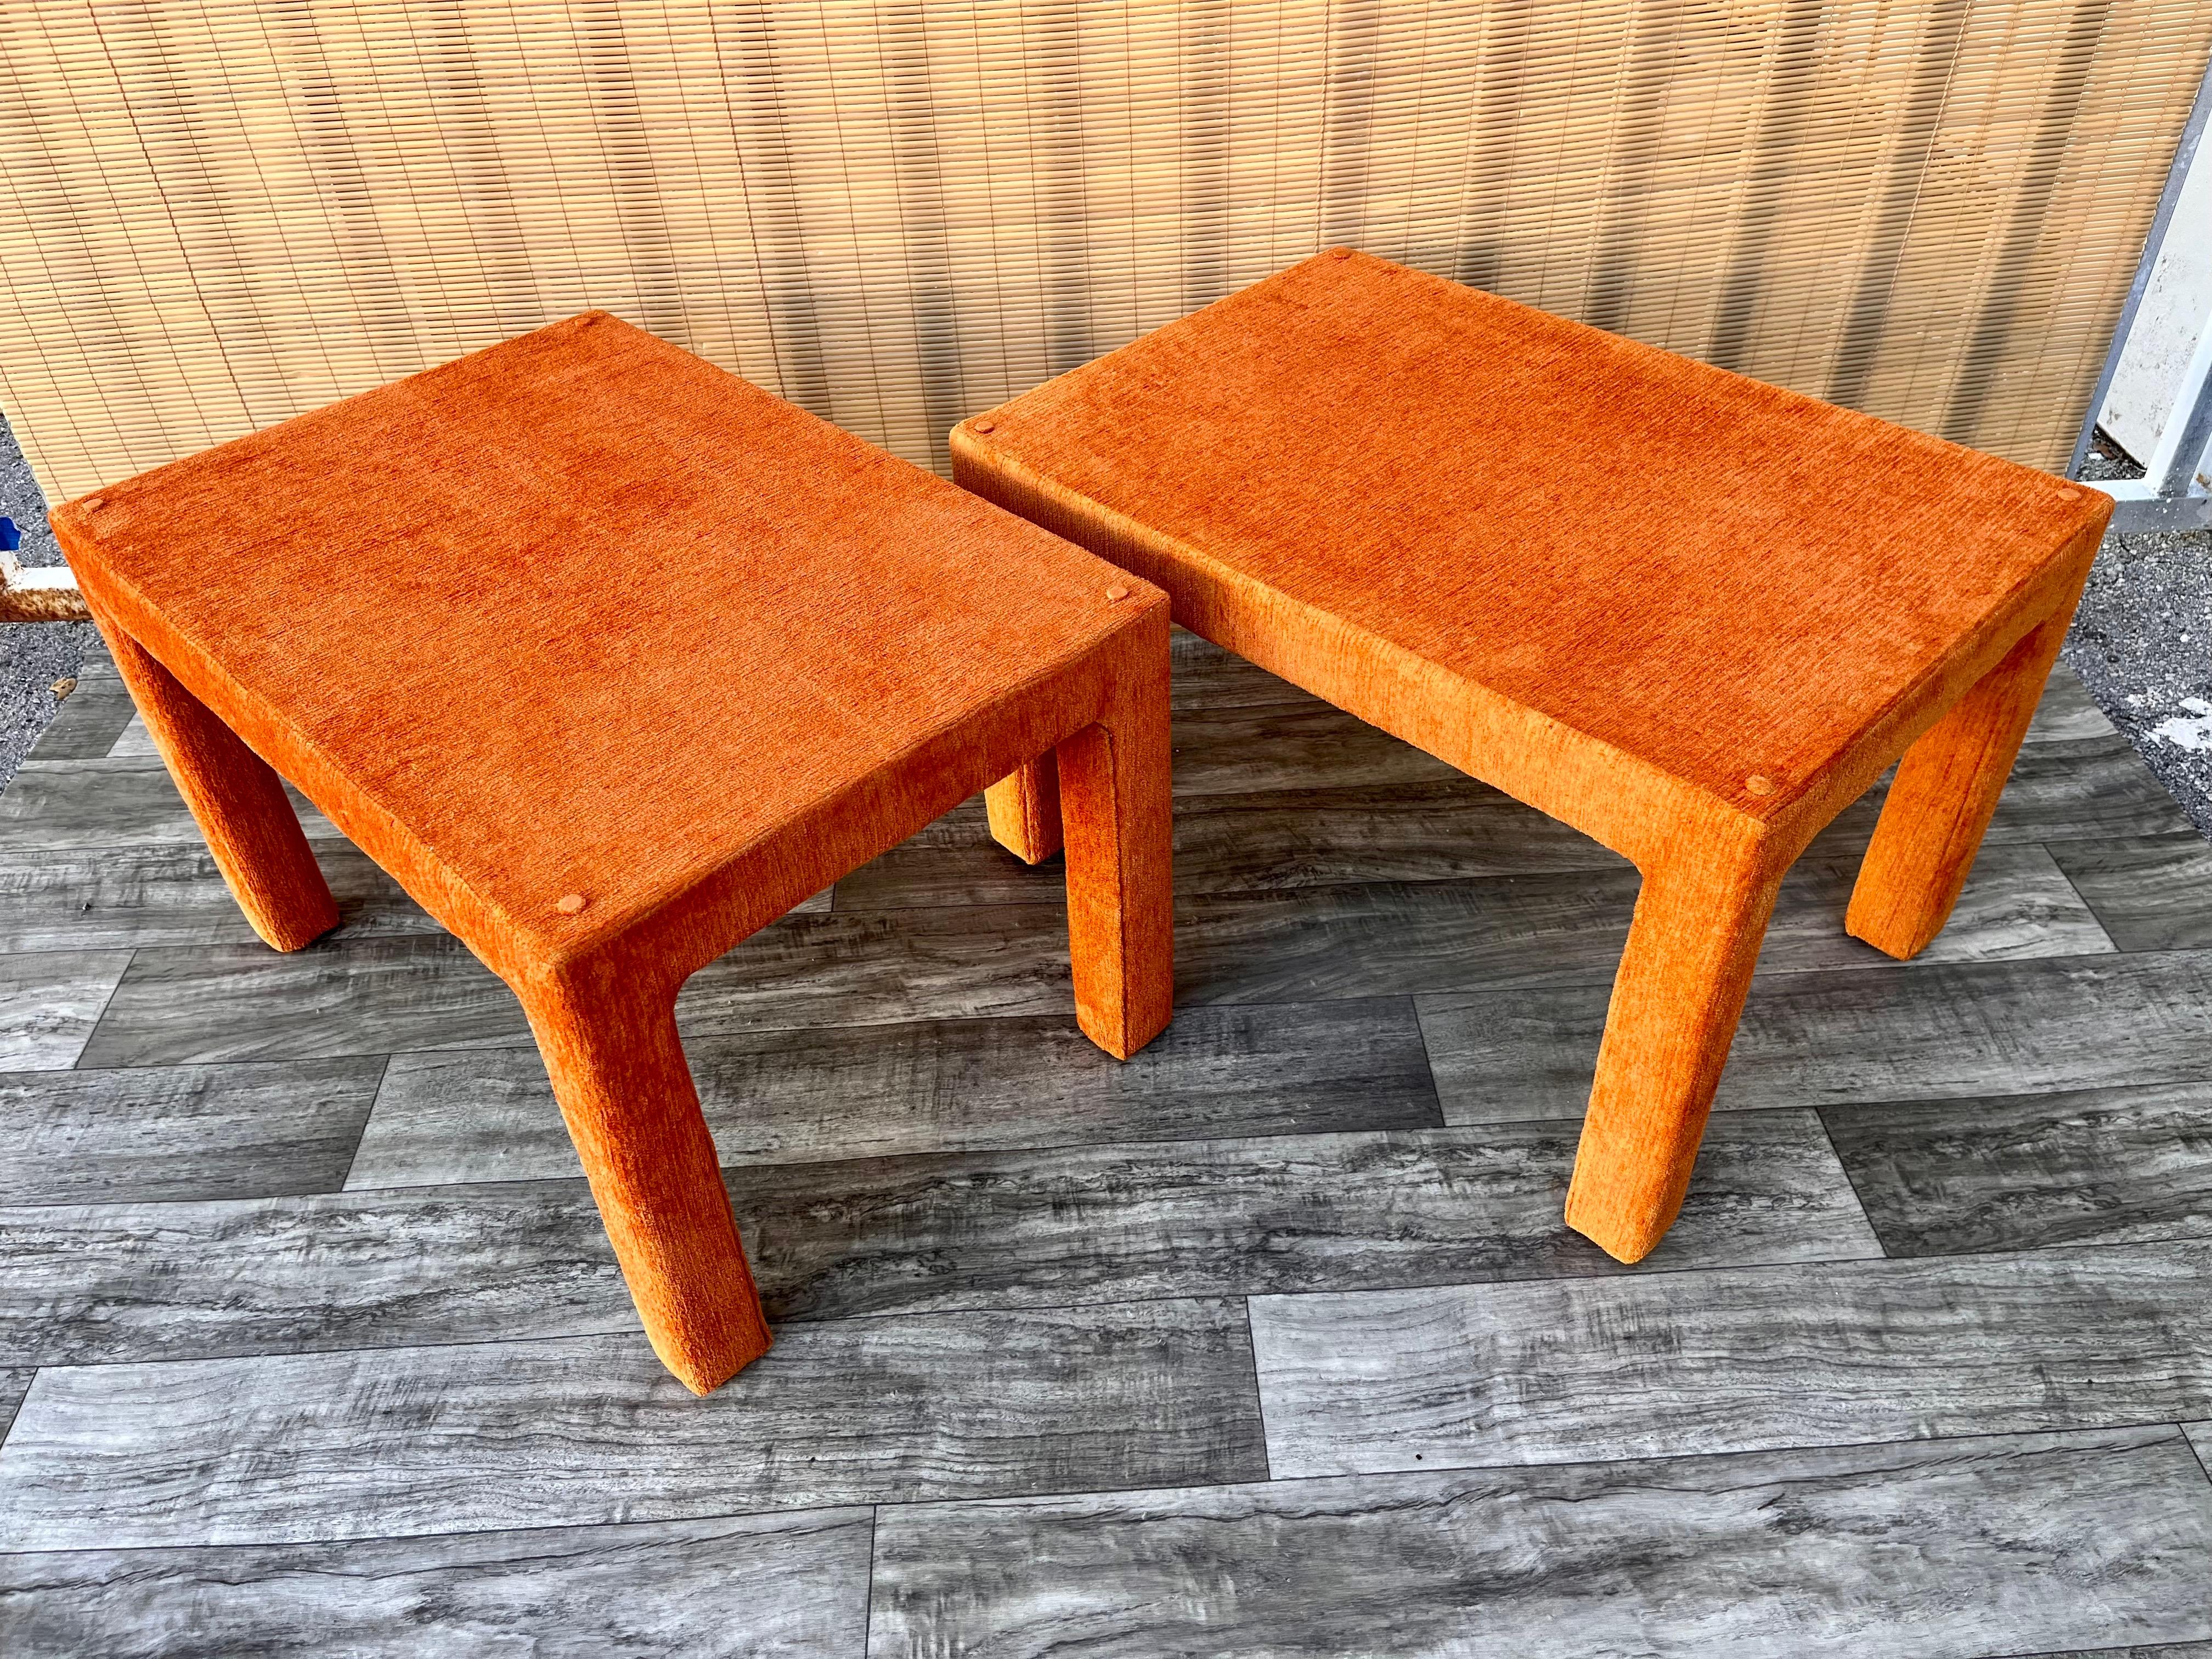 Pair of Mid-Century Modern Fully Upholstered Side Tables, circa 1970s For Sale 8